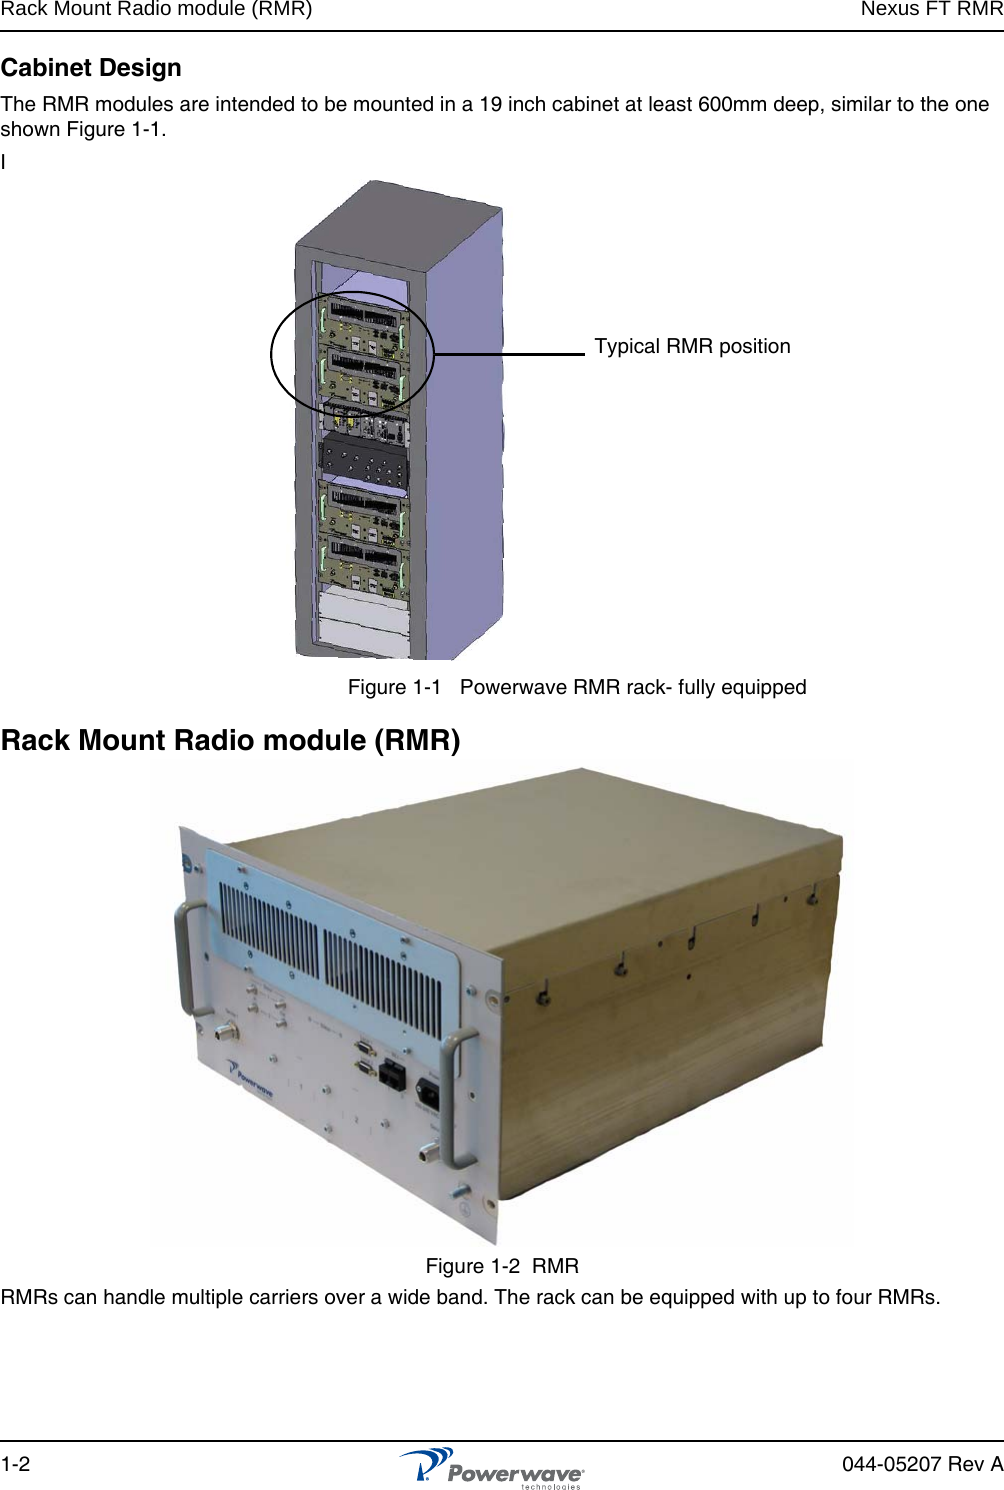 Rack Mount Radio module (RMR) Nexus FT RMR1-2 044-05207 Rev ACabinet DesignThe RMR modules are intended to be mounted in a 19 inch cabinet at least 600mm deep, similar to the one shown Figure 1-1.IFigure 1-1   Powerwave RMR rack- fully equippedRack Mount Radio module (RMR)Figure 1-2  RMR RMRs can handle multiple carriers over a wide band. The rack can be equipped with up to four RMRs.Typical RMR position